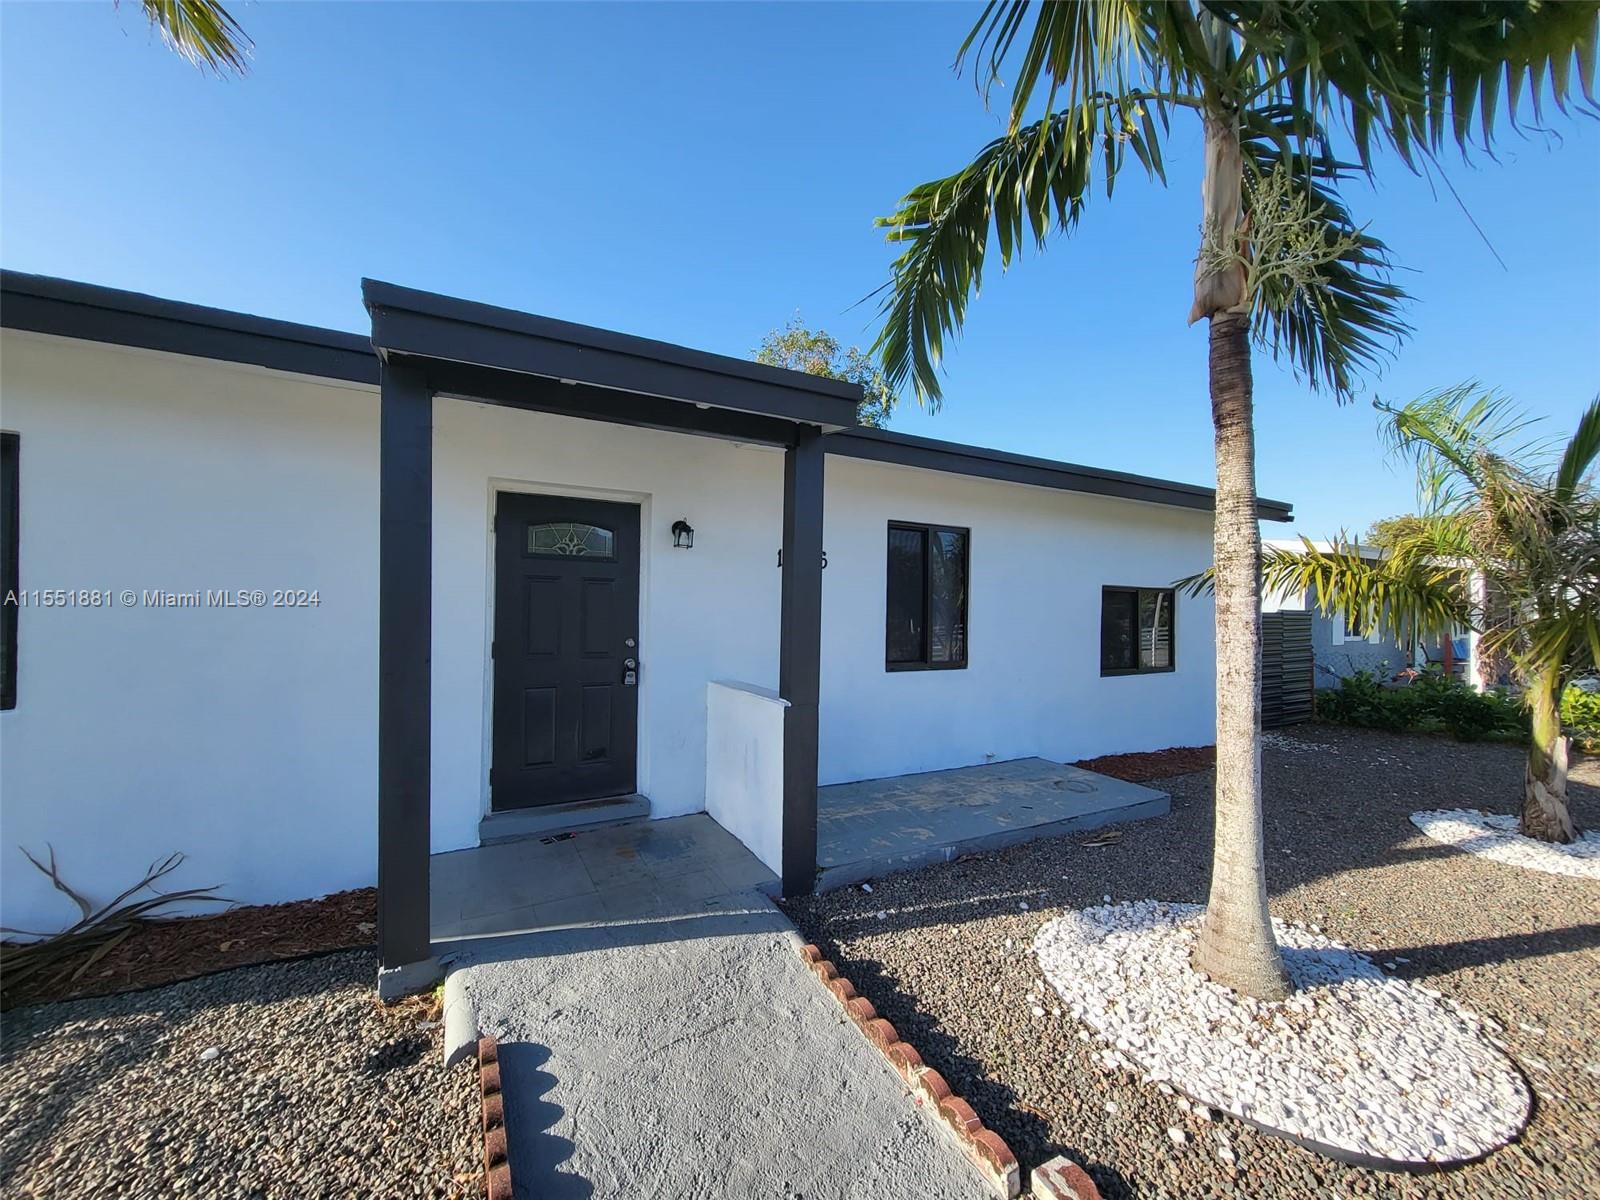 1106 NW 11th Ct 1, Fort Lauderdale, Florida 33311, 3 Bedrooms Bedrooms, ,2 BathroomsBathrooms,Residentiallease,For Rent,1106 NW 11th Ct 1,A11551881